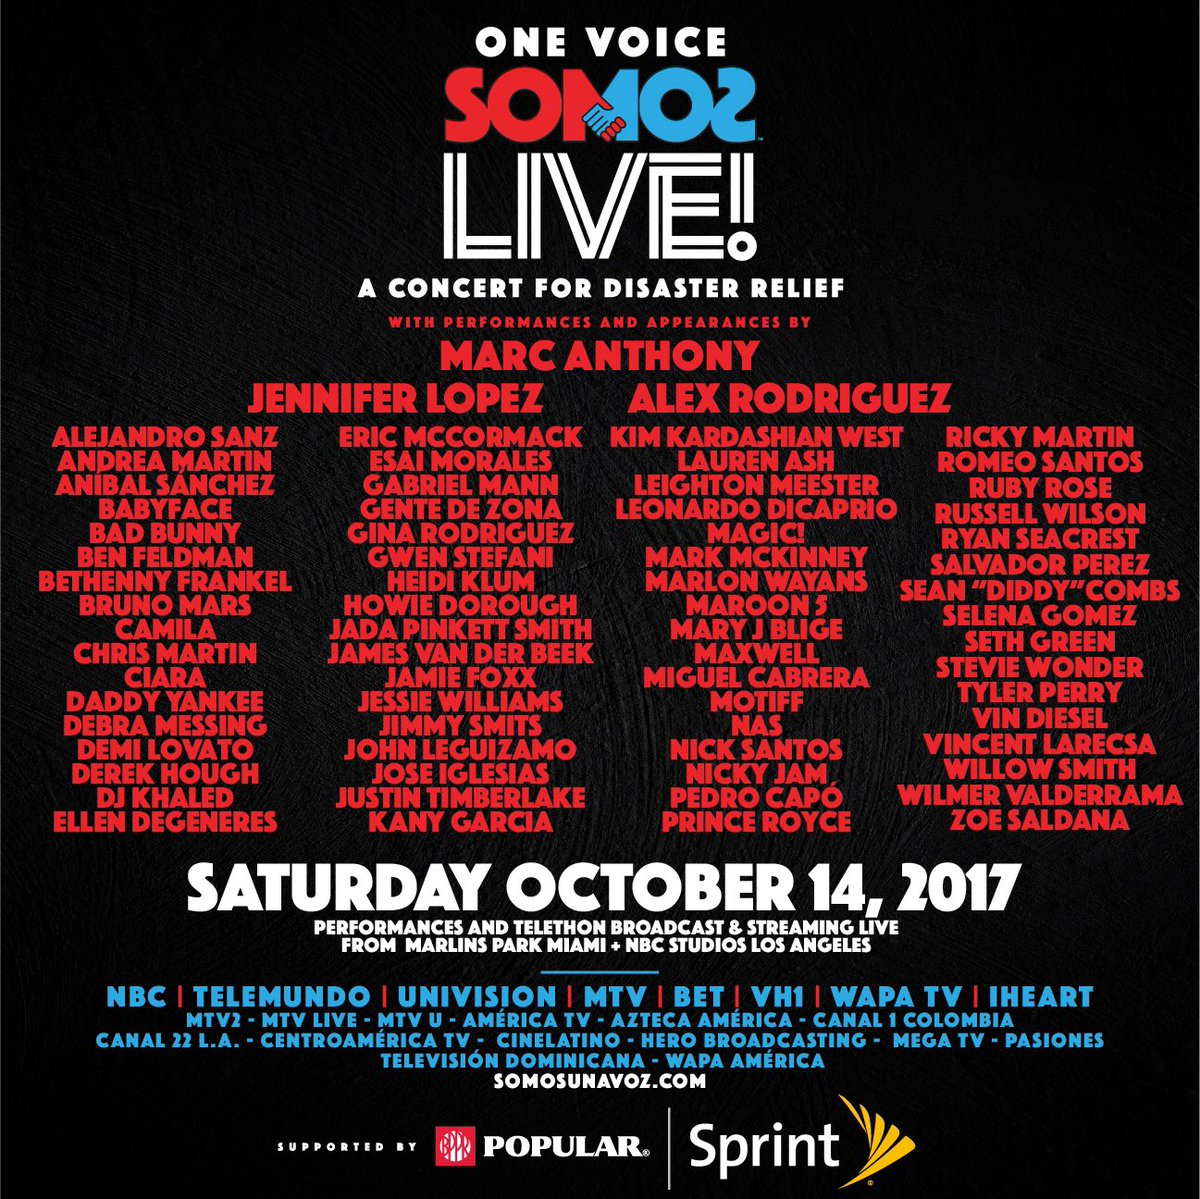 Join me and many others tomorrow night as we are #OneVoice #SomosUnaVoz ???? https://t.co/KC4BMvWlGW